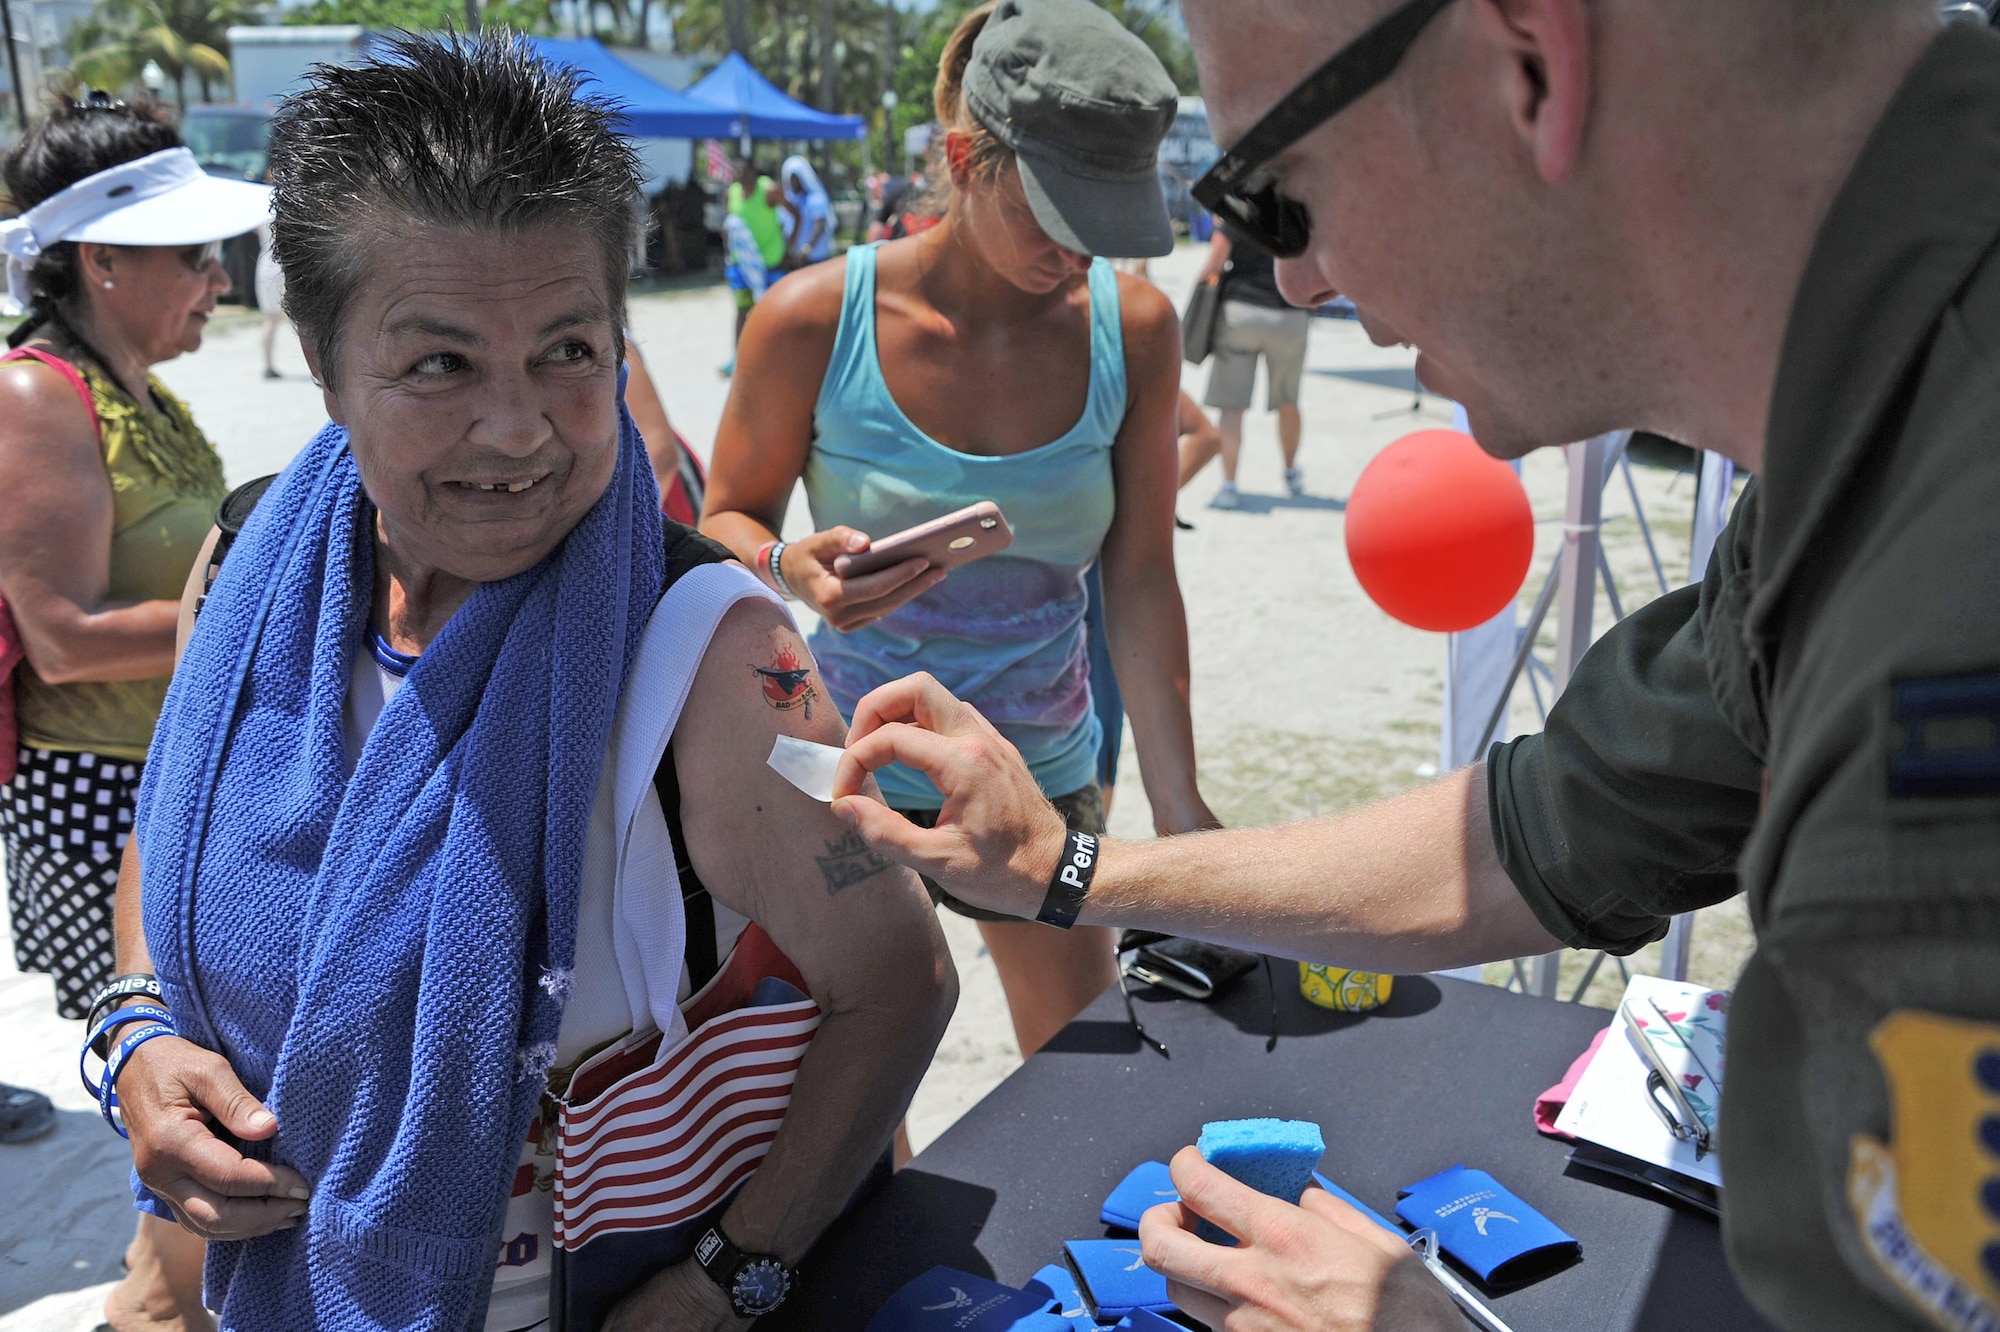 A Salute to America’s Heroes Air and Sea Show attendee receives a B-1B Lancer tattoo from Capt. Christopher Williston, 34th Bomb Squadron B-1B Lancer Weapons System Officer, at Miami Beach, Fla., May 28, 2017. Bomber Airmen attended the airshow to eduate and the public and generate awarenss of their respctive aircraft’s mission and capabilities. (U.S. Air Force photo by Senior Airman Erin Trower)